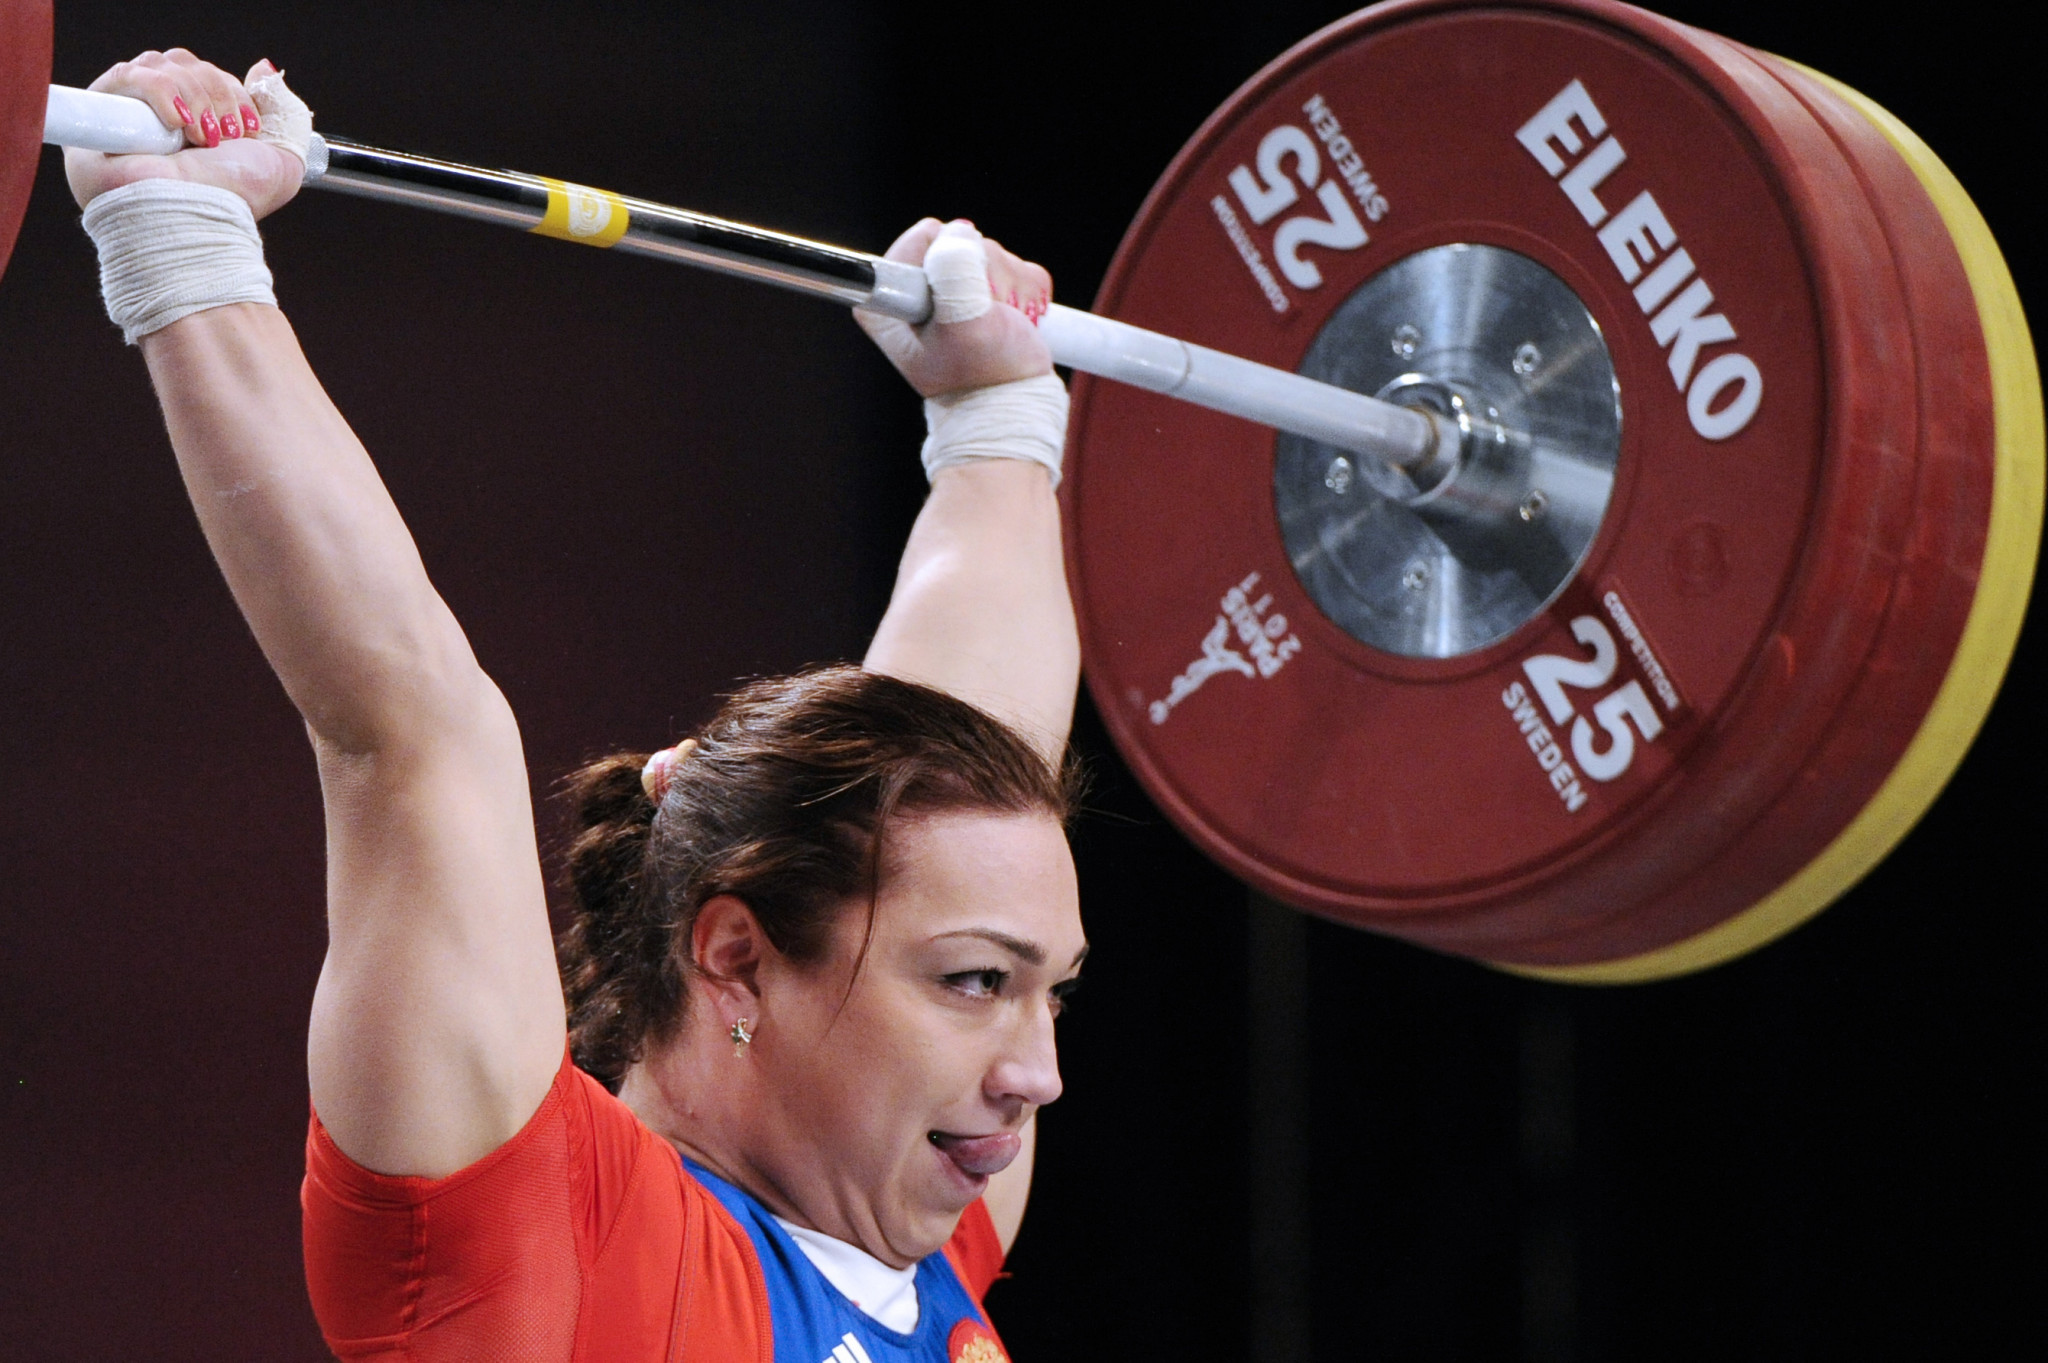 Nadezda Evstyukhina is among the 12 Russian weightlifters provisionally suspended by the IWF ©Getty Images